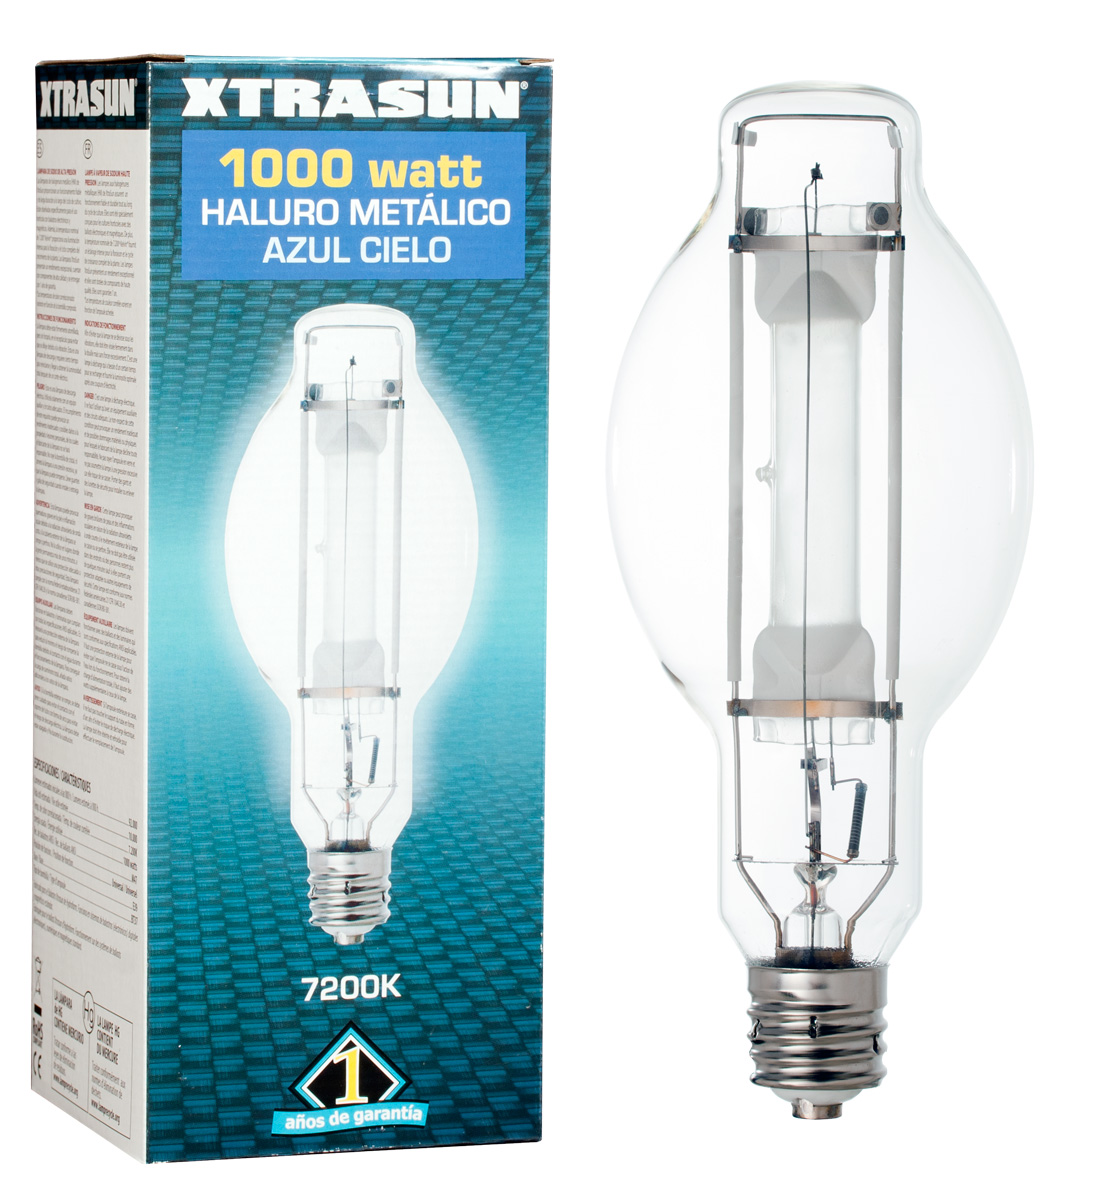 Picture for Xtrasun Metal Halide (MH) Lamp, 1000W, 7200K